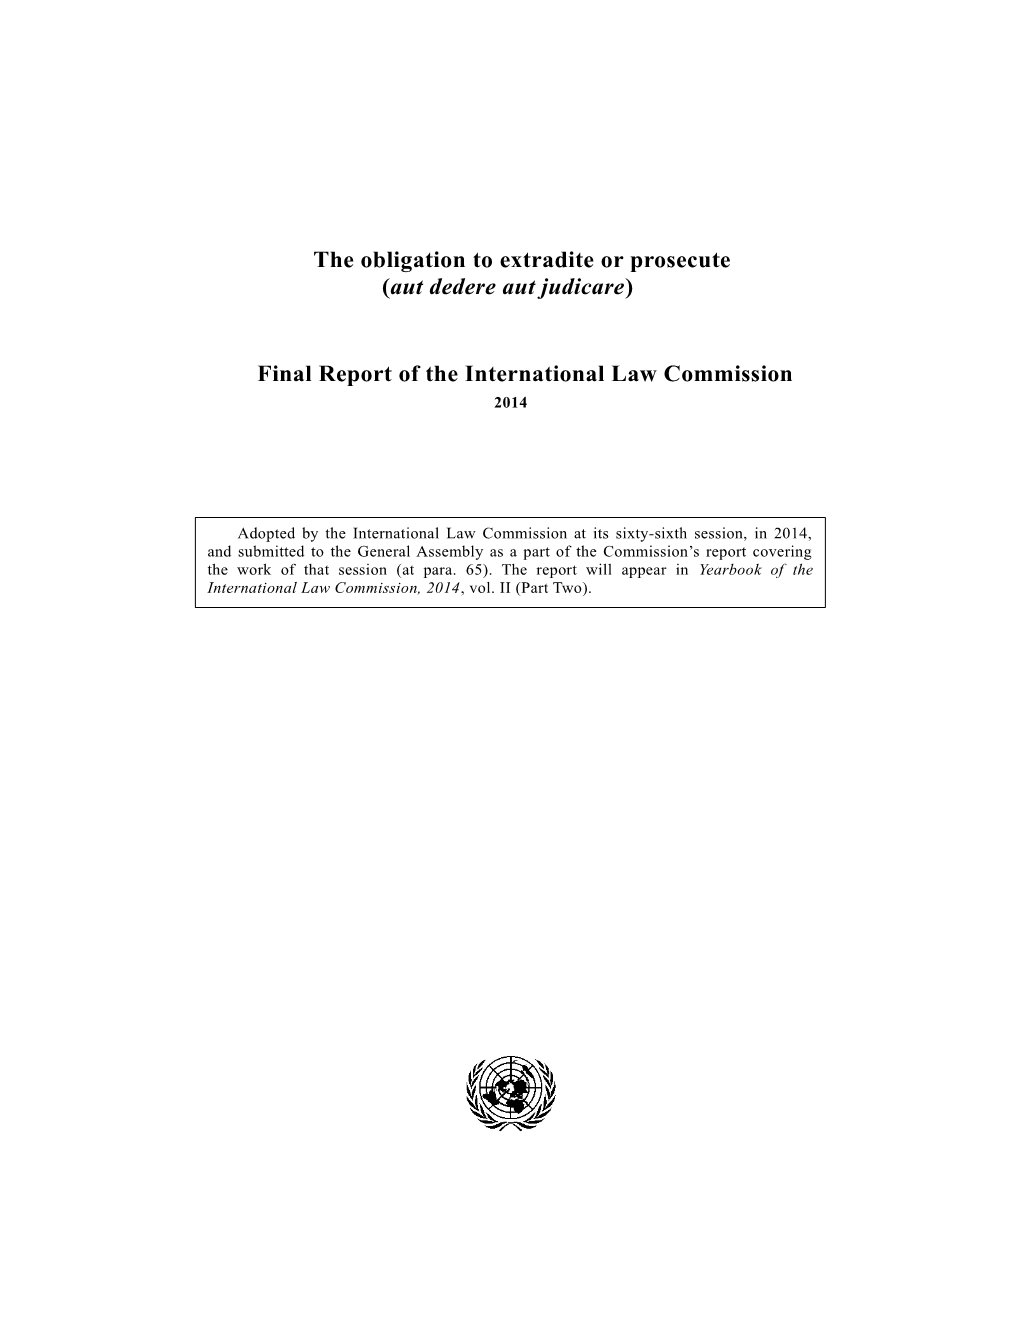 Final Report of the International Law Commission